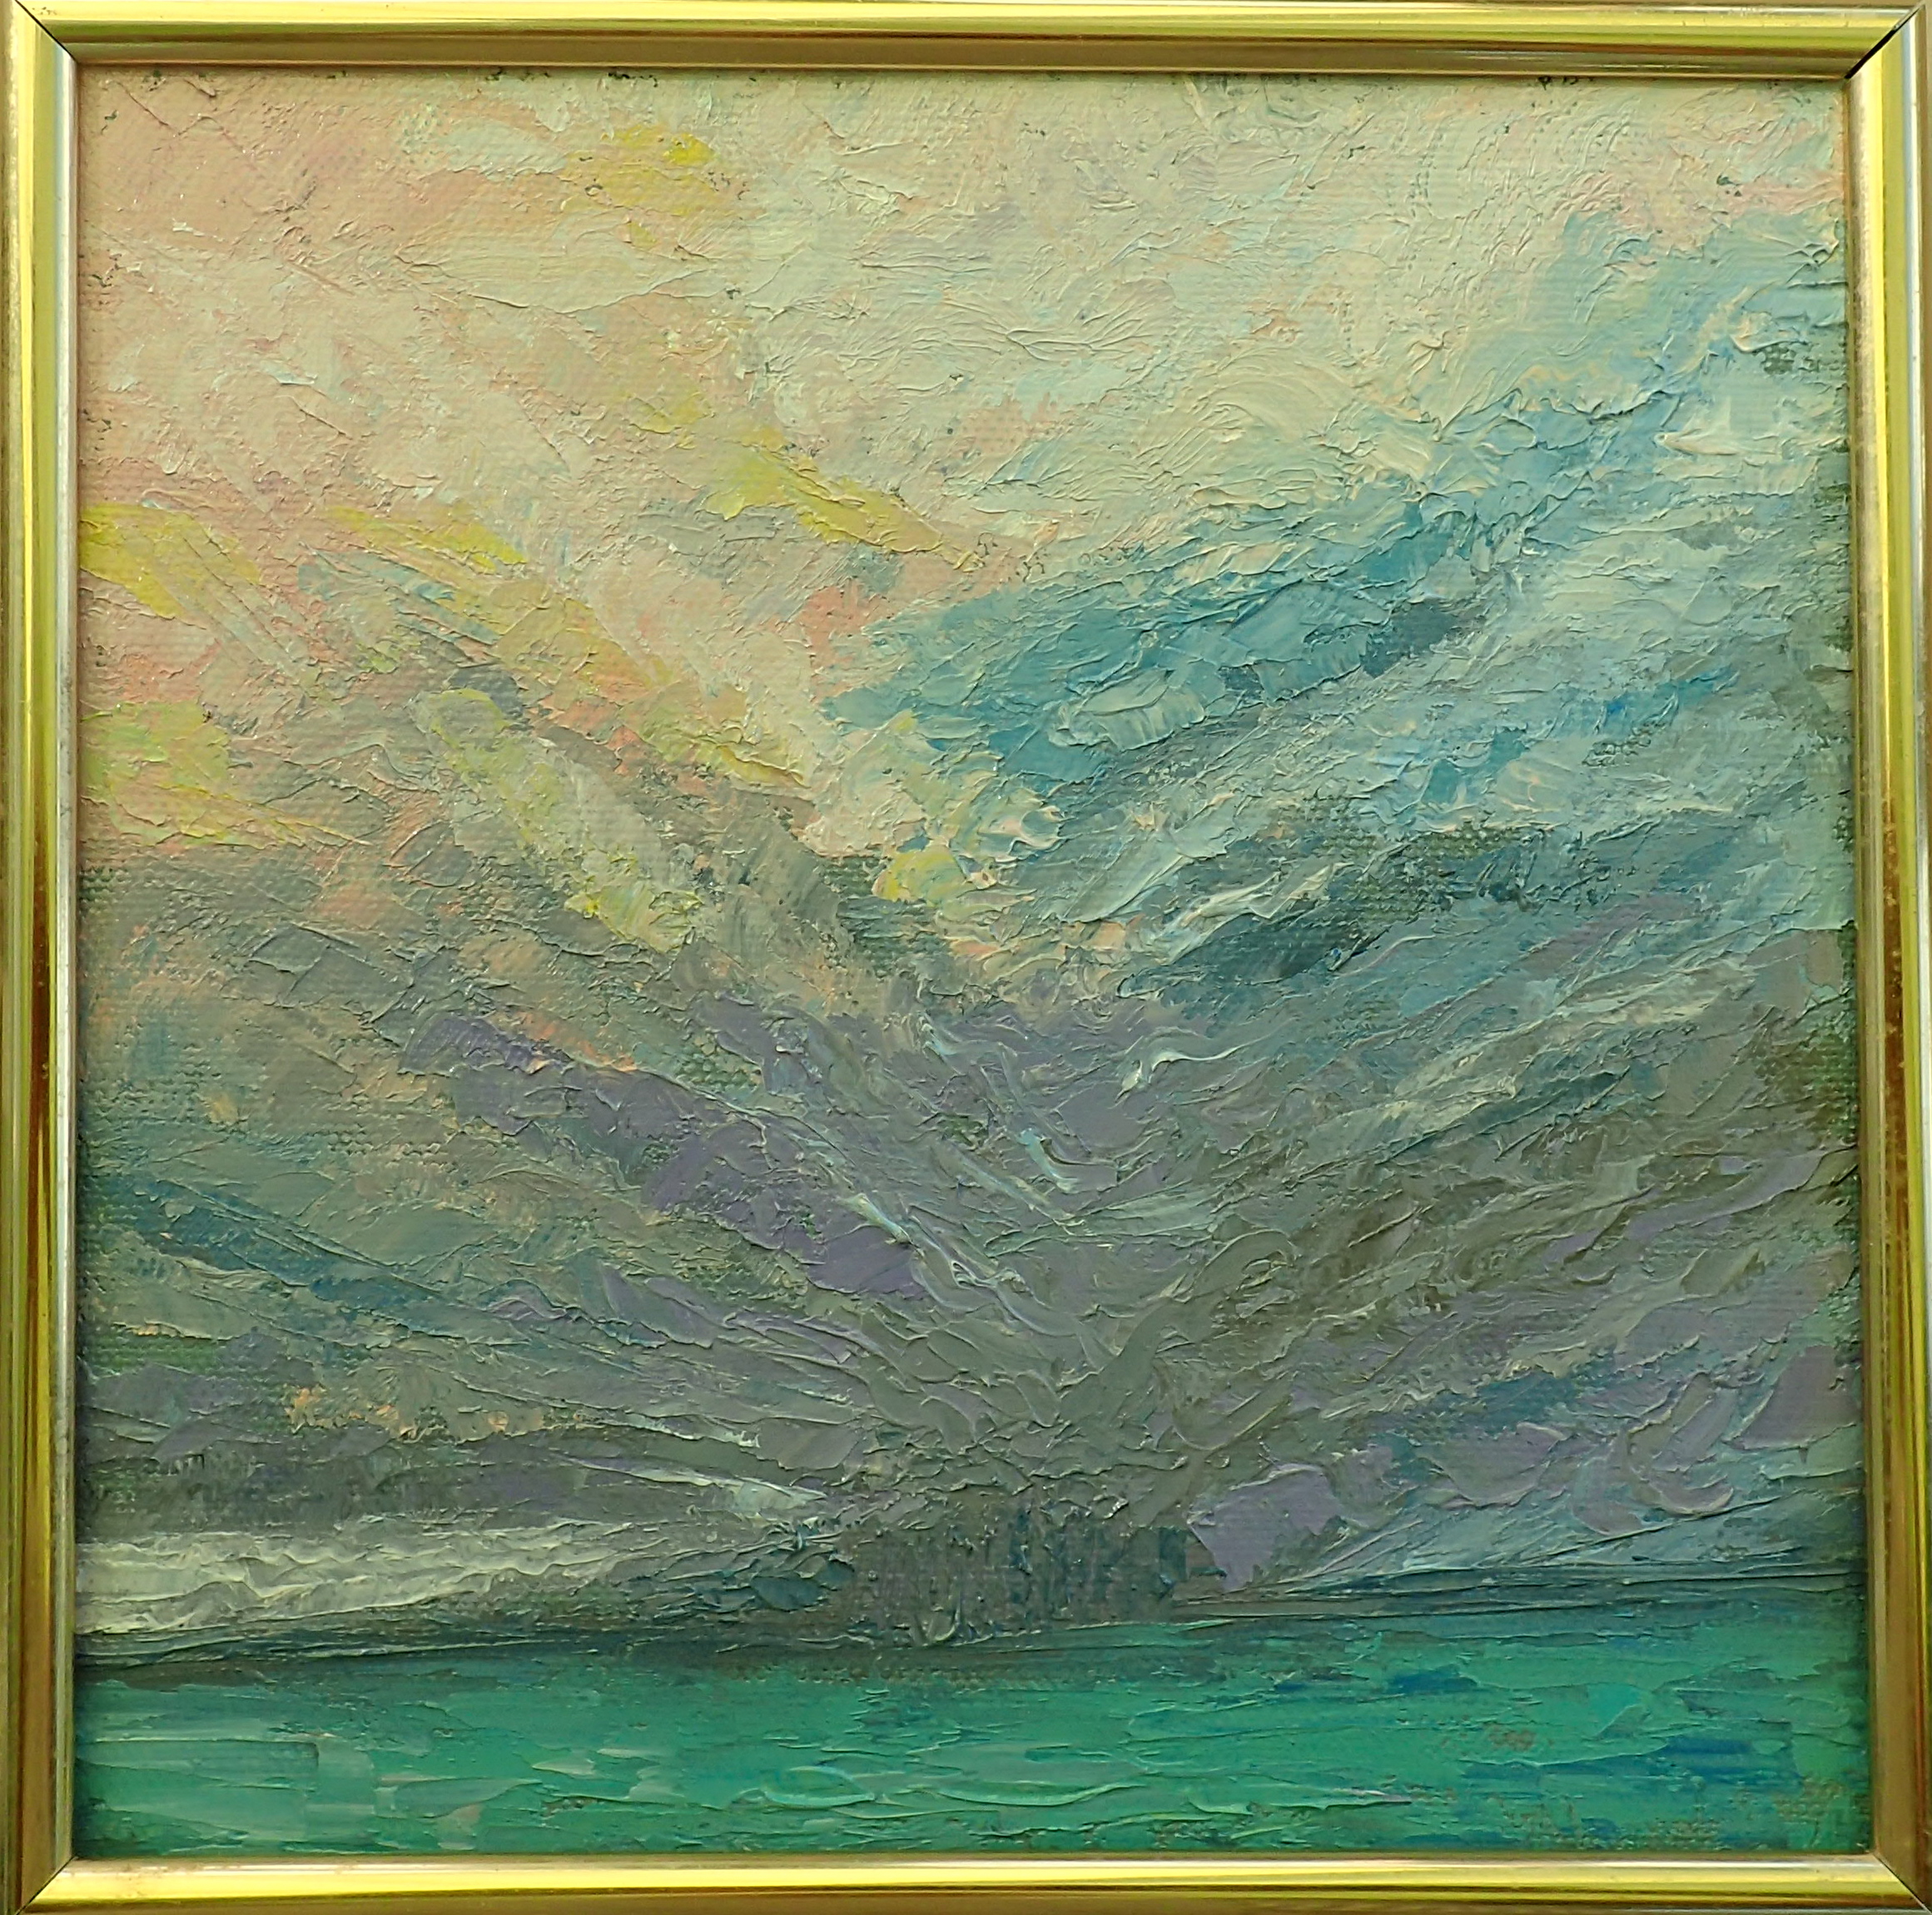 Original  8x8" oil painting on canvas framed in gold metal frame.  The western horizon beams a palette of colourful streamers of sunlit clouds delivering the visual message of an oncoming squall. Pale